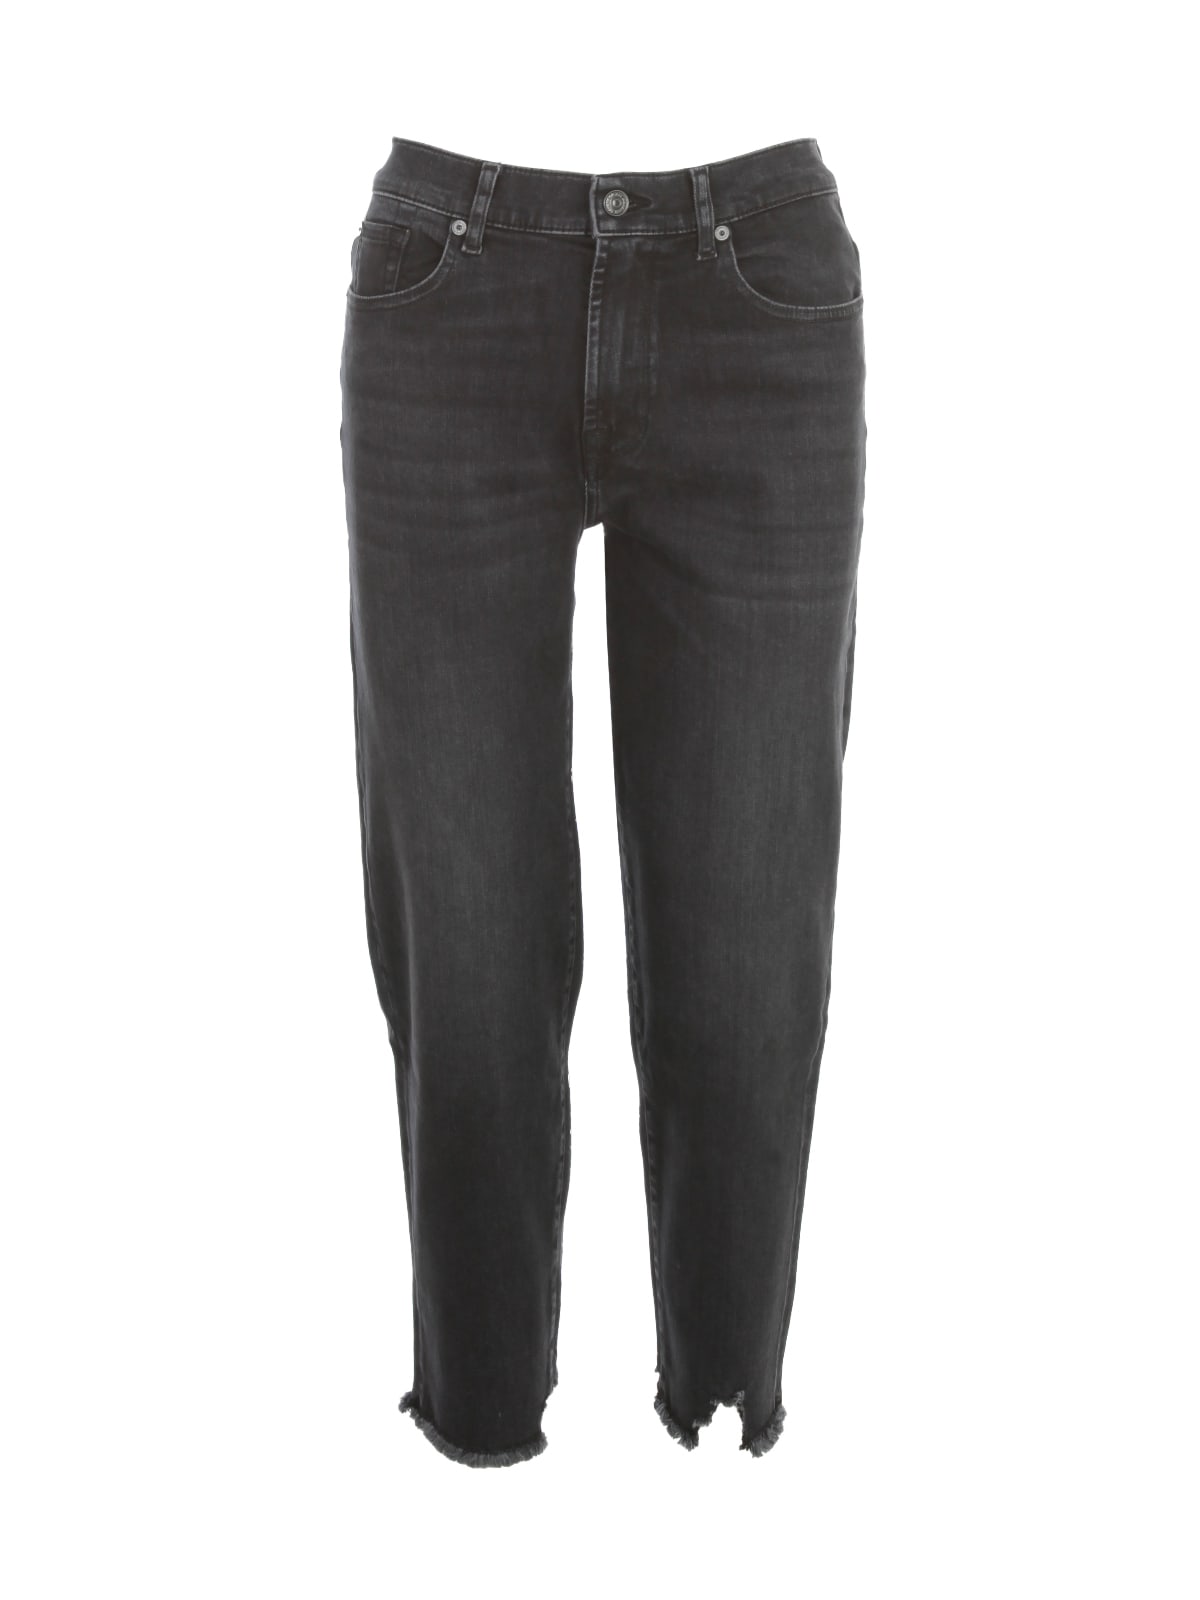 7 For All Mankind Malia Luxe Vintage W/destroyed Hem